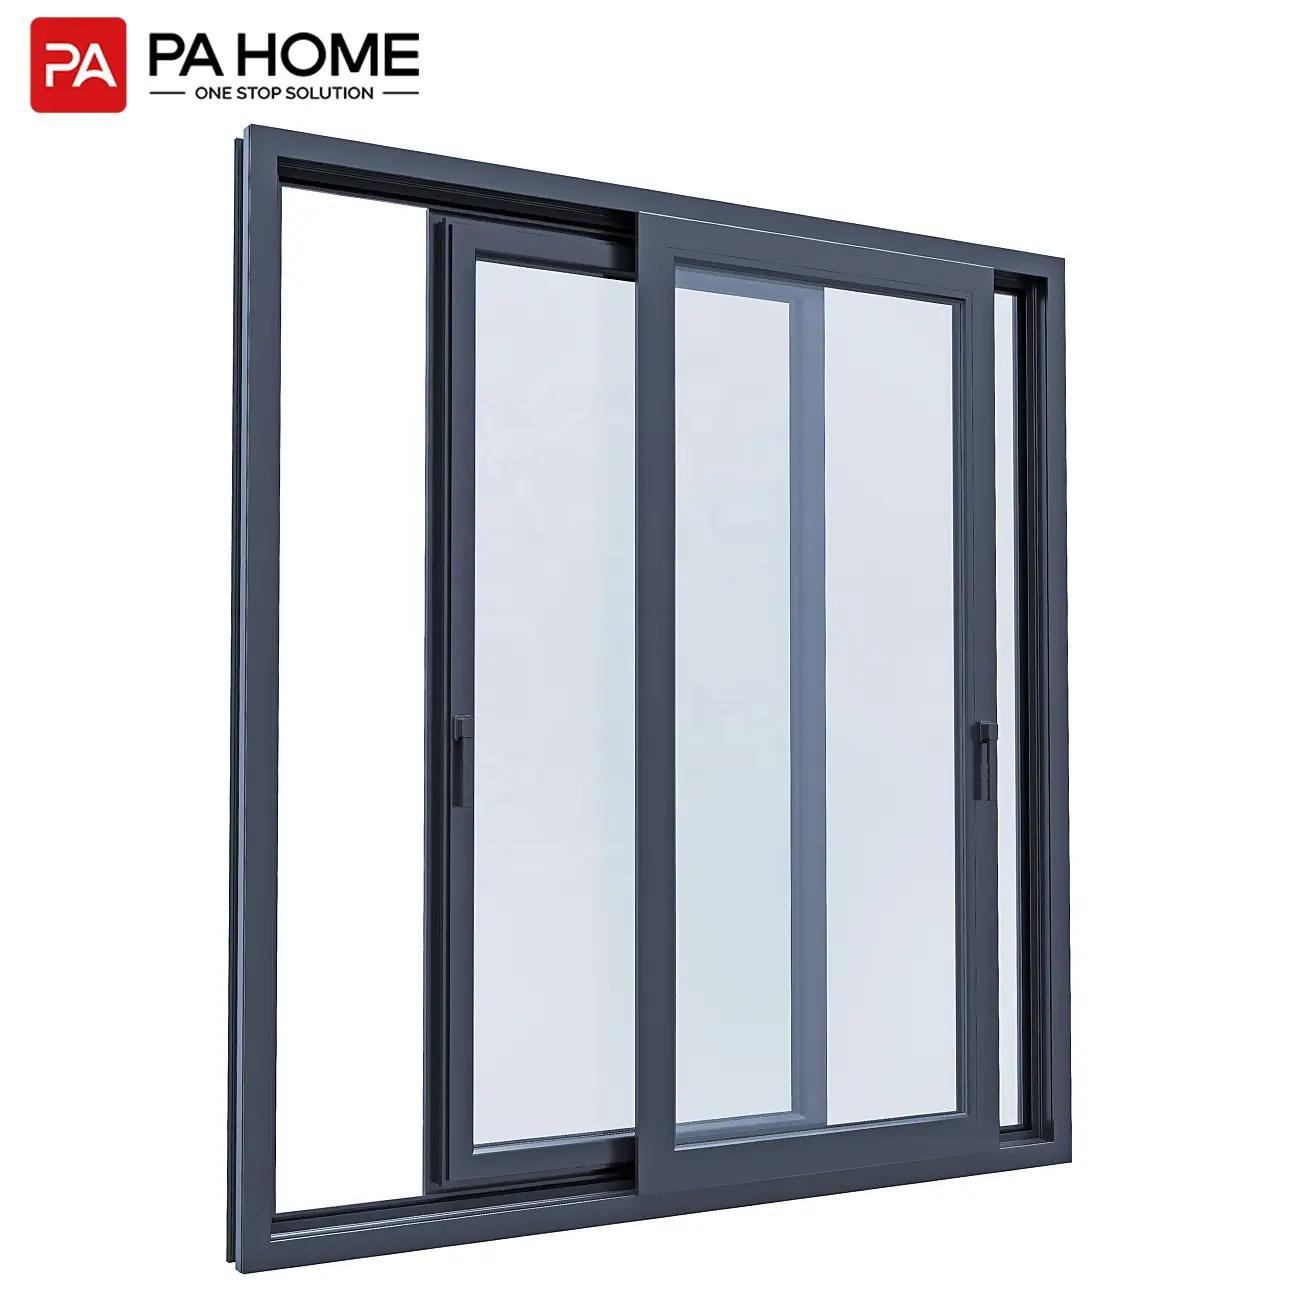 PA commercial tempered glass residential window grill design slide windows